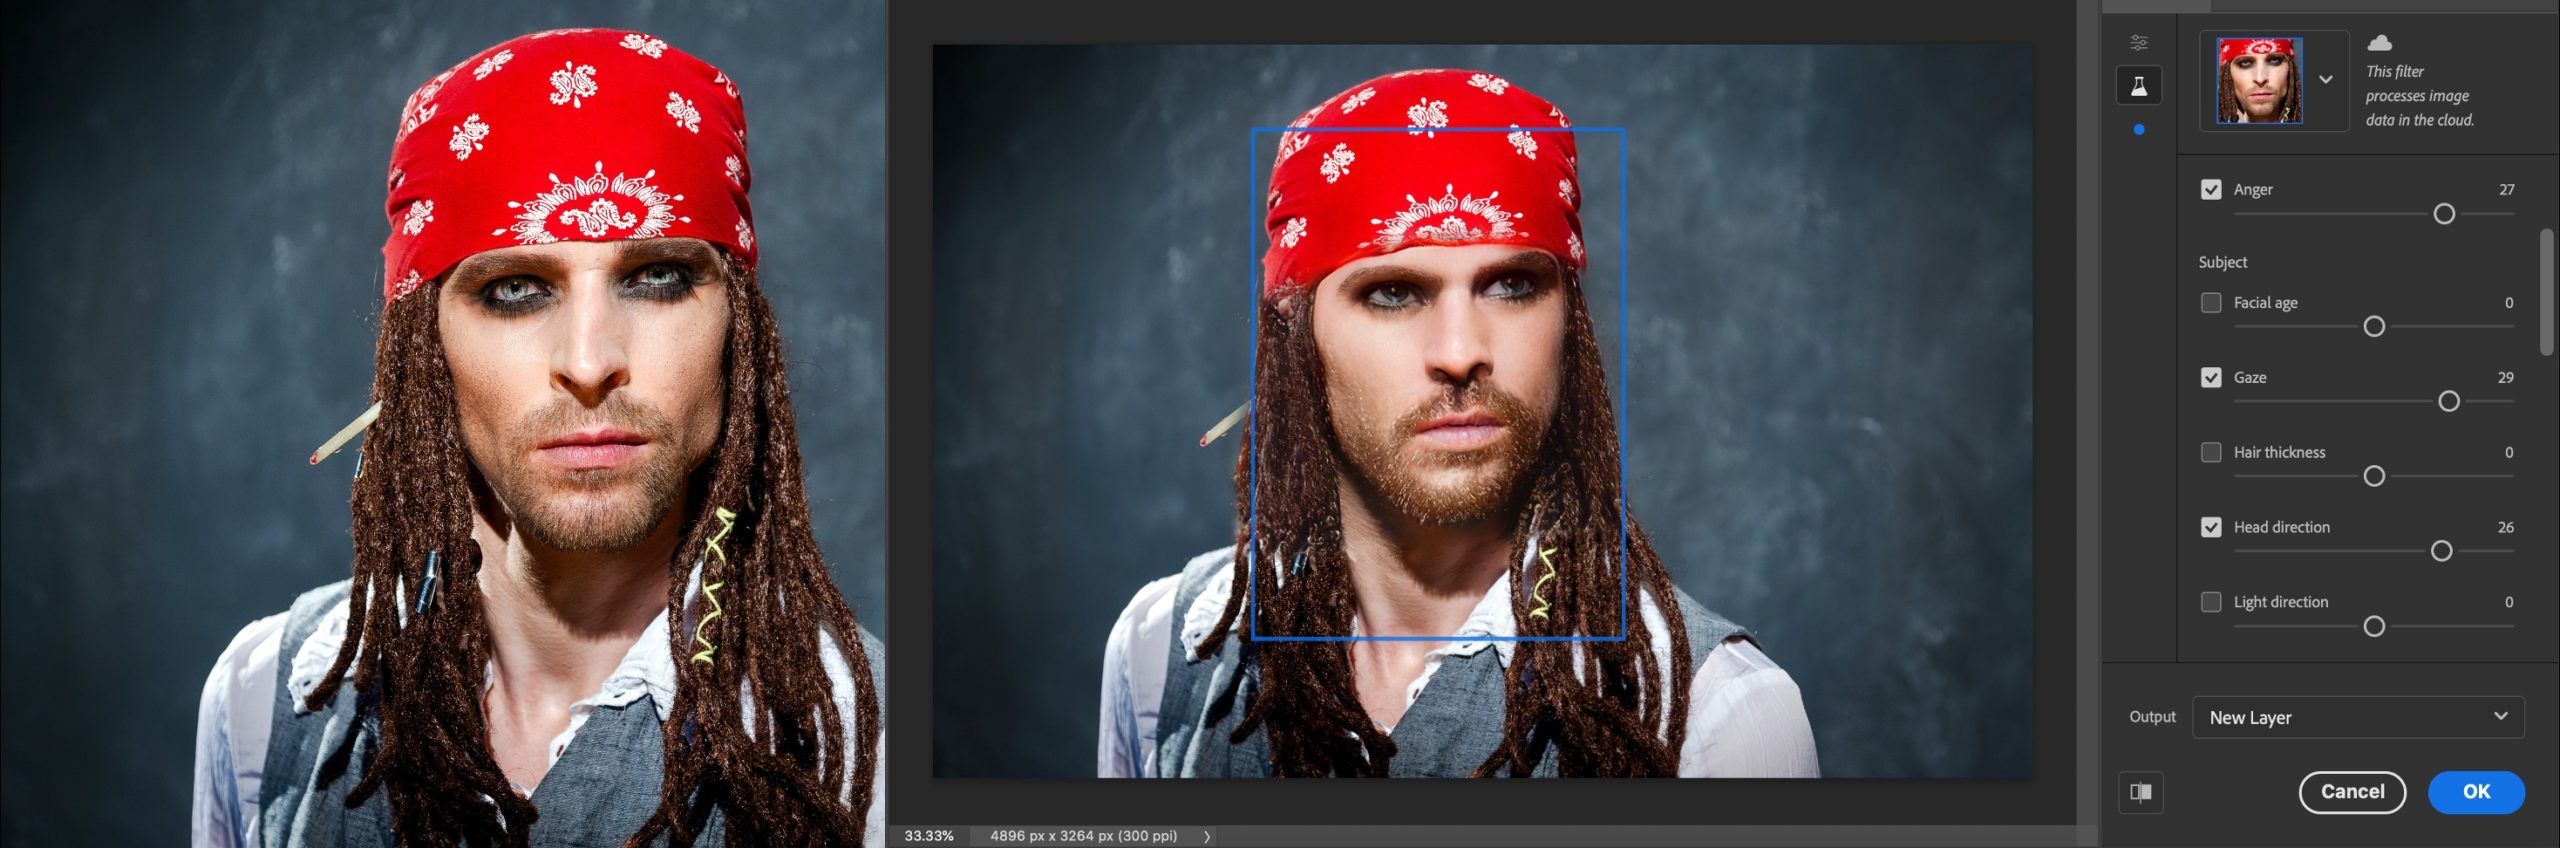 Pirate face scowl scaled